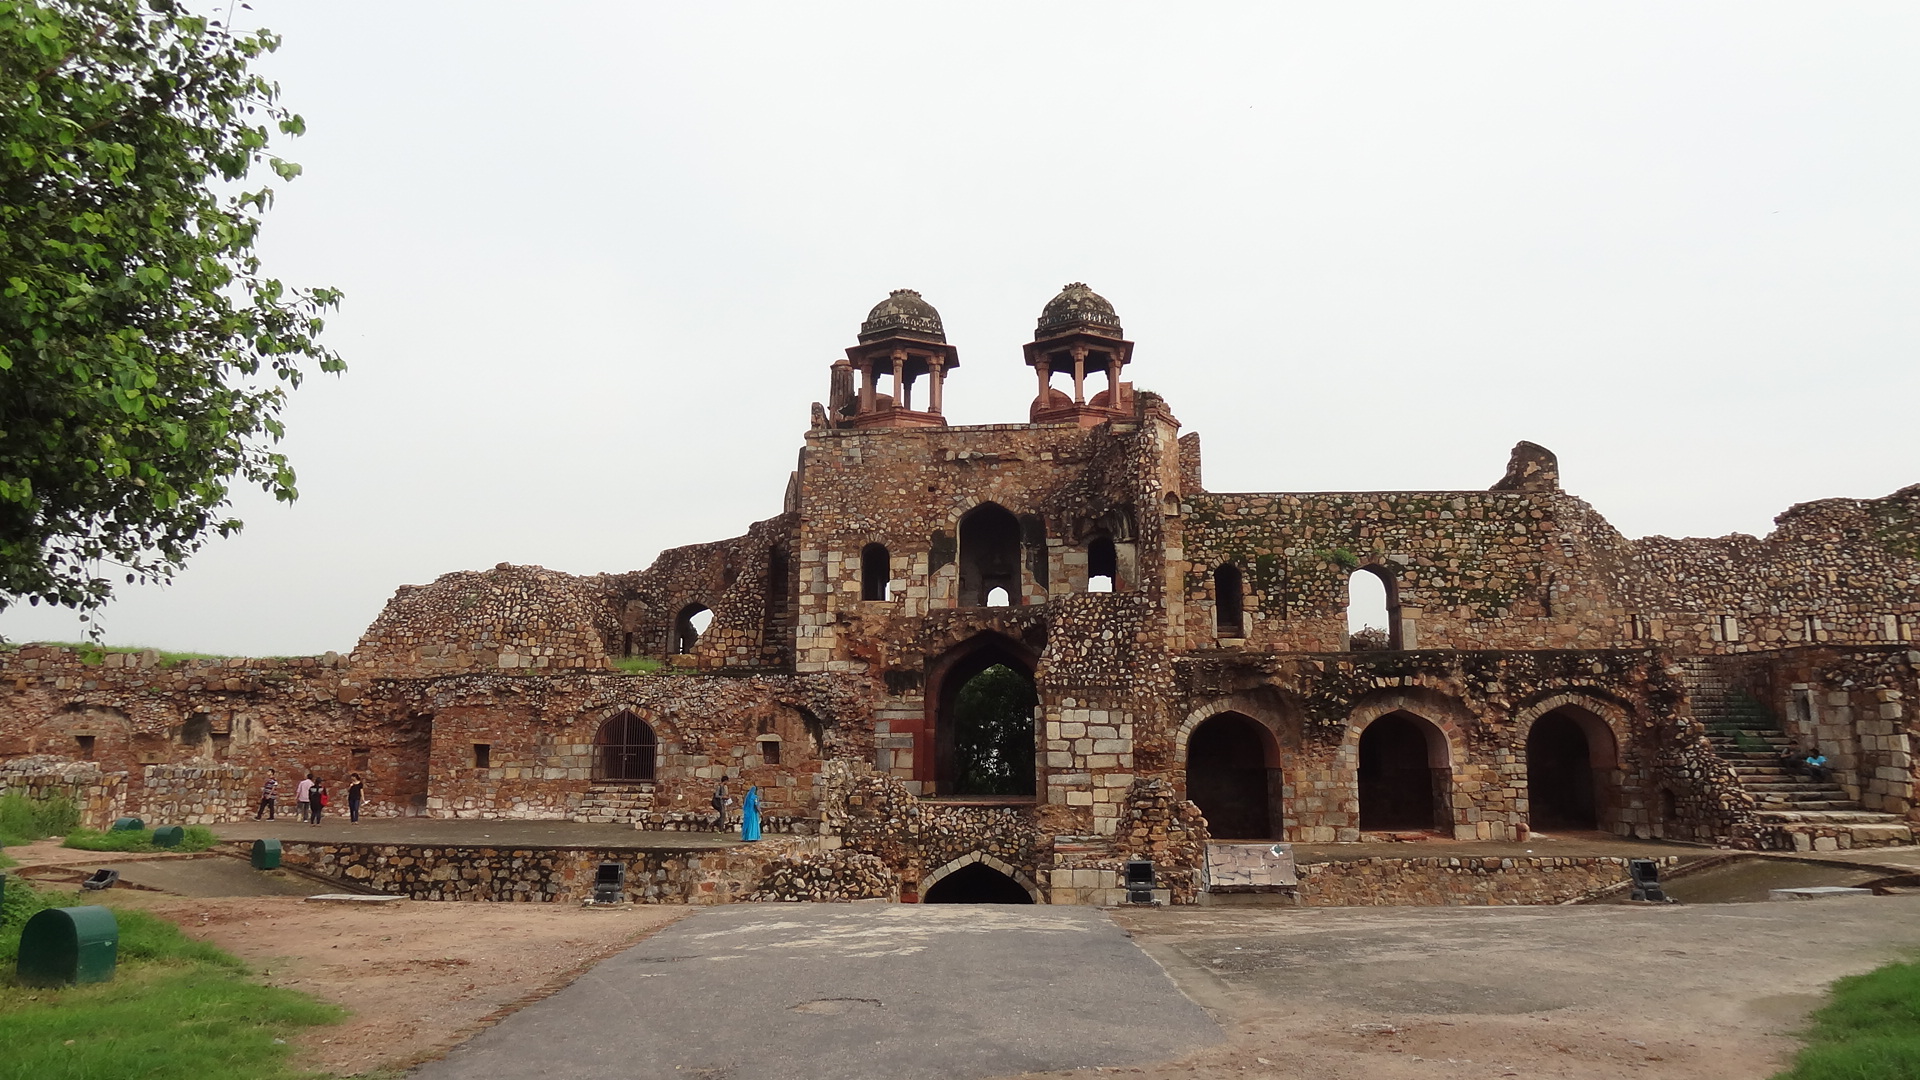 The Purana Qila Museum is enriched with glorious Mughal artefacts